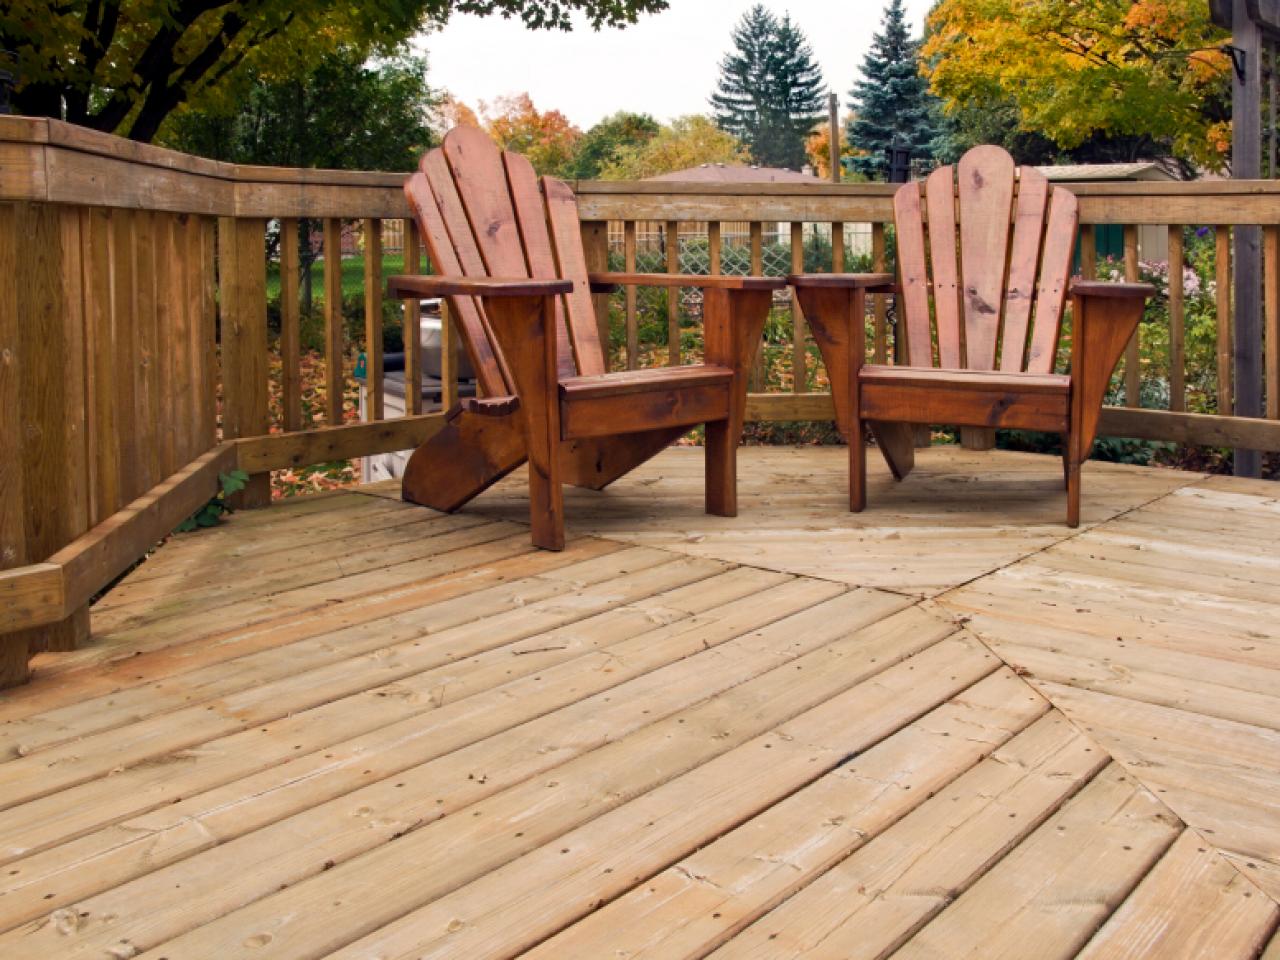 3 Types of Decks to Maximize Your Outdoor Living